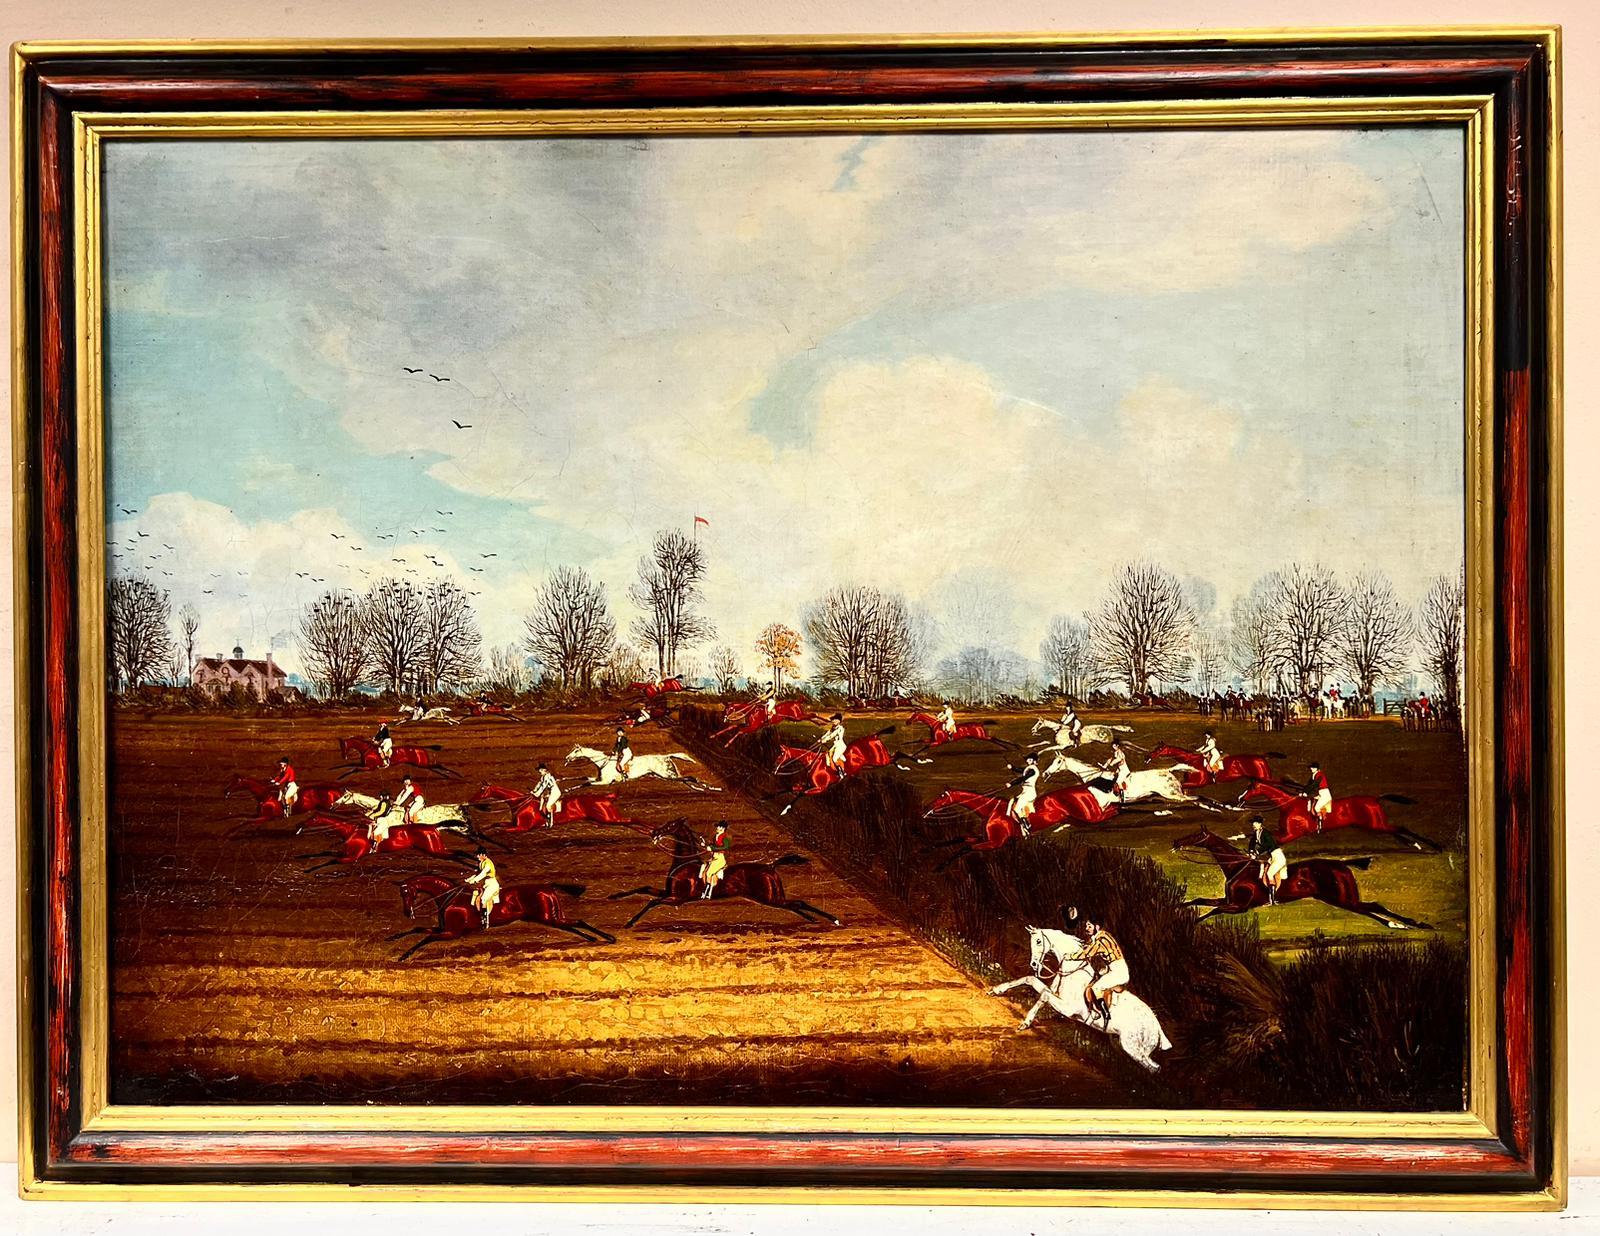 Very large British Horse Racing Steeple Chase Sporting Picture - Painting by James Pollard